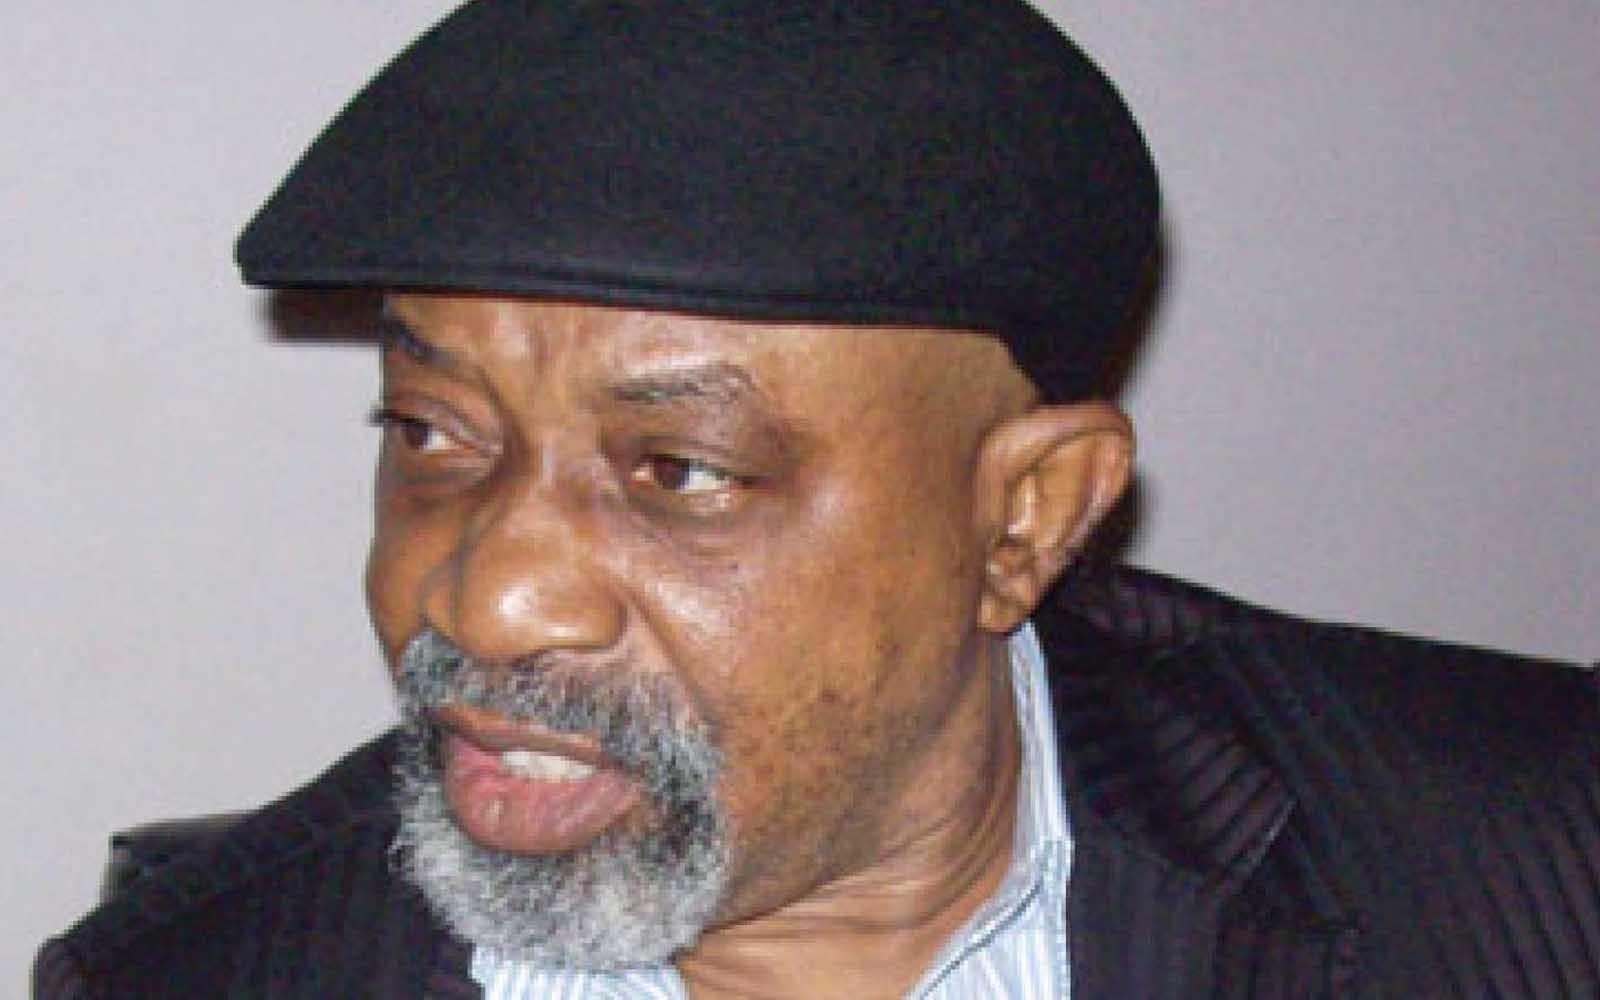 FG Can’t Hold Us In Nigeria Using Bonds, Doctors Reply Ngige